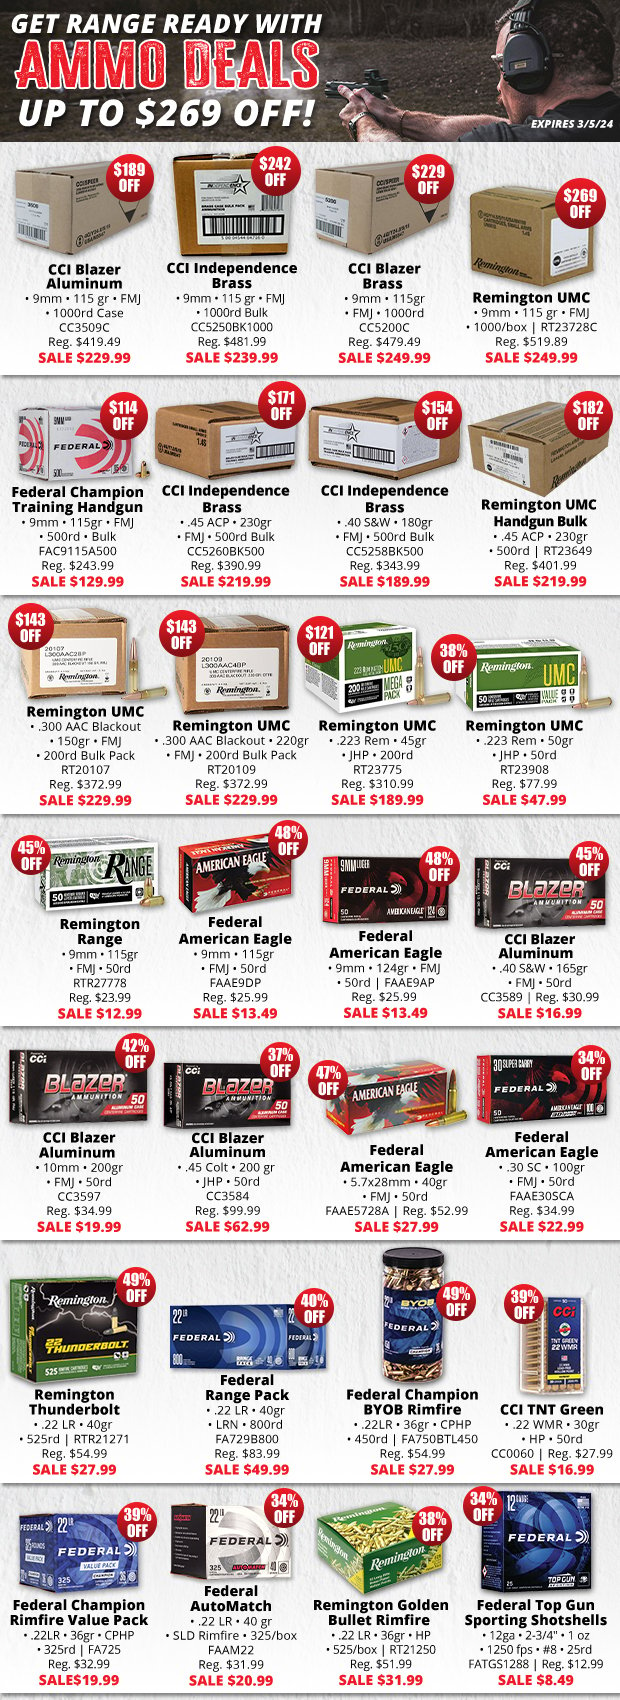 Up to $269 Off Ammo Range Ready Deals!